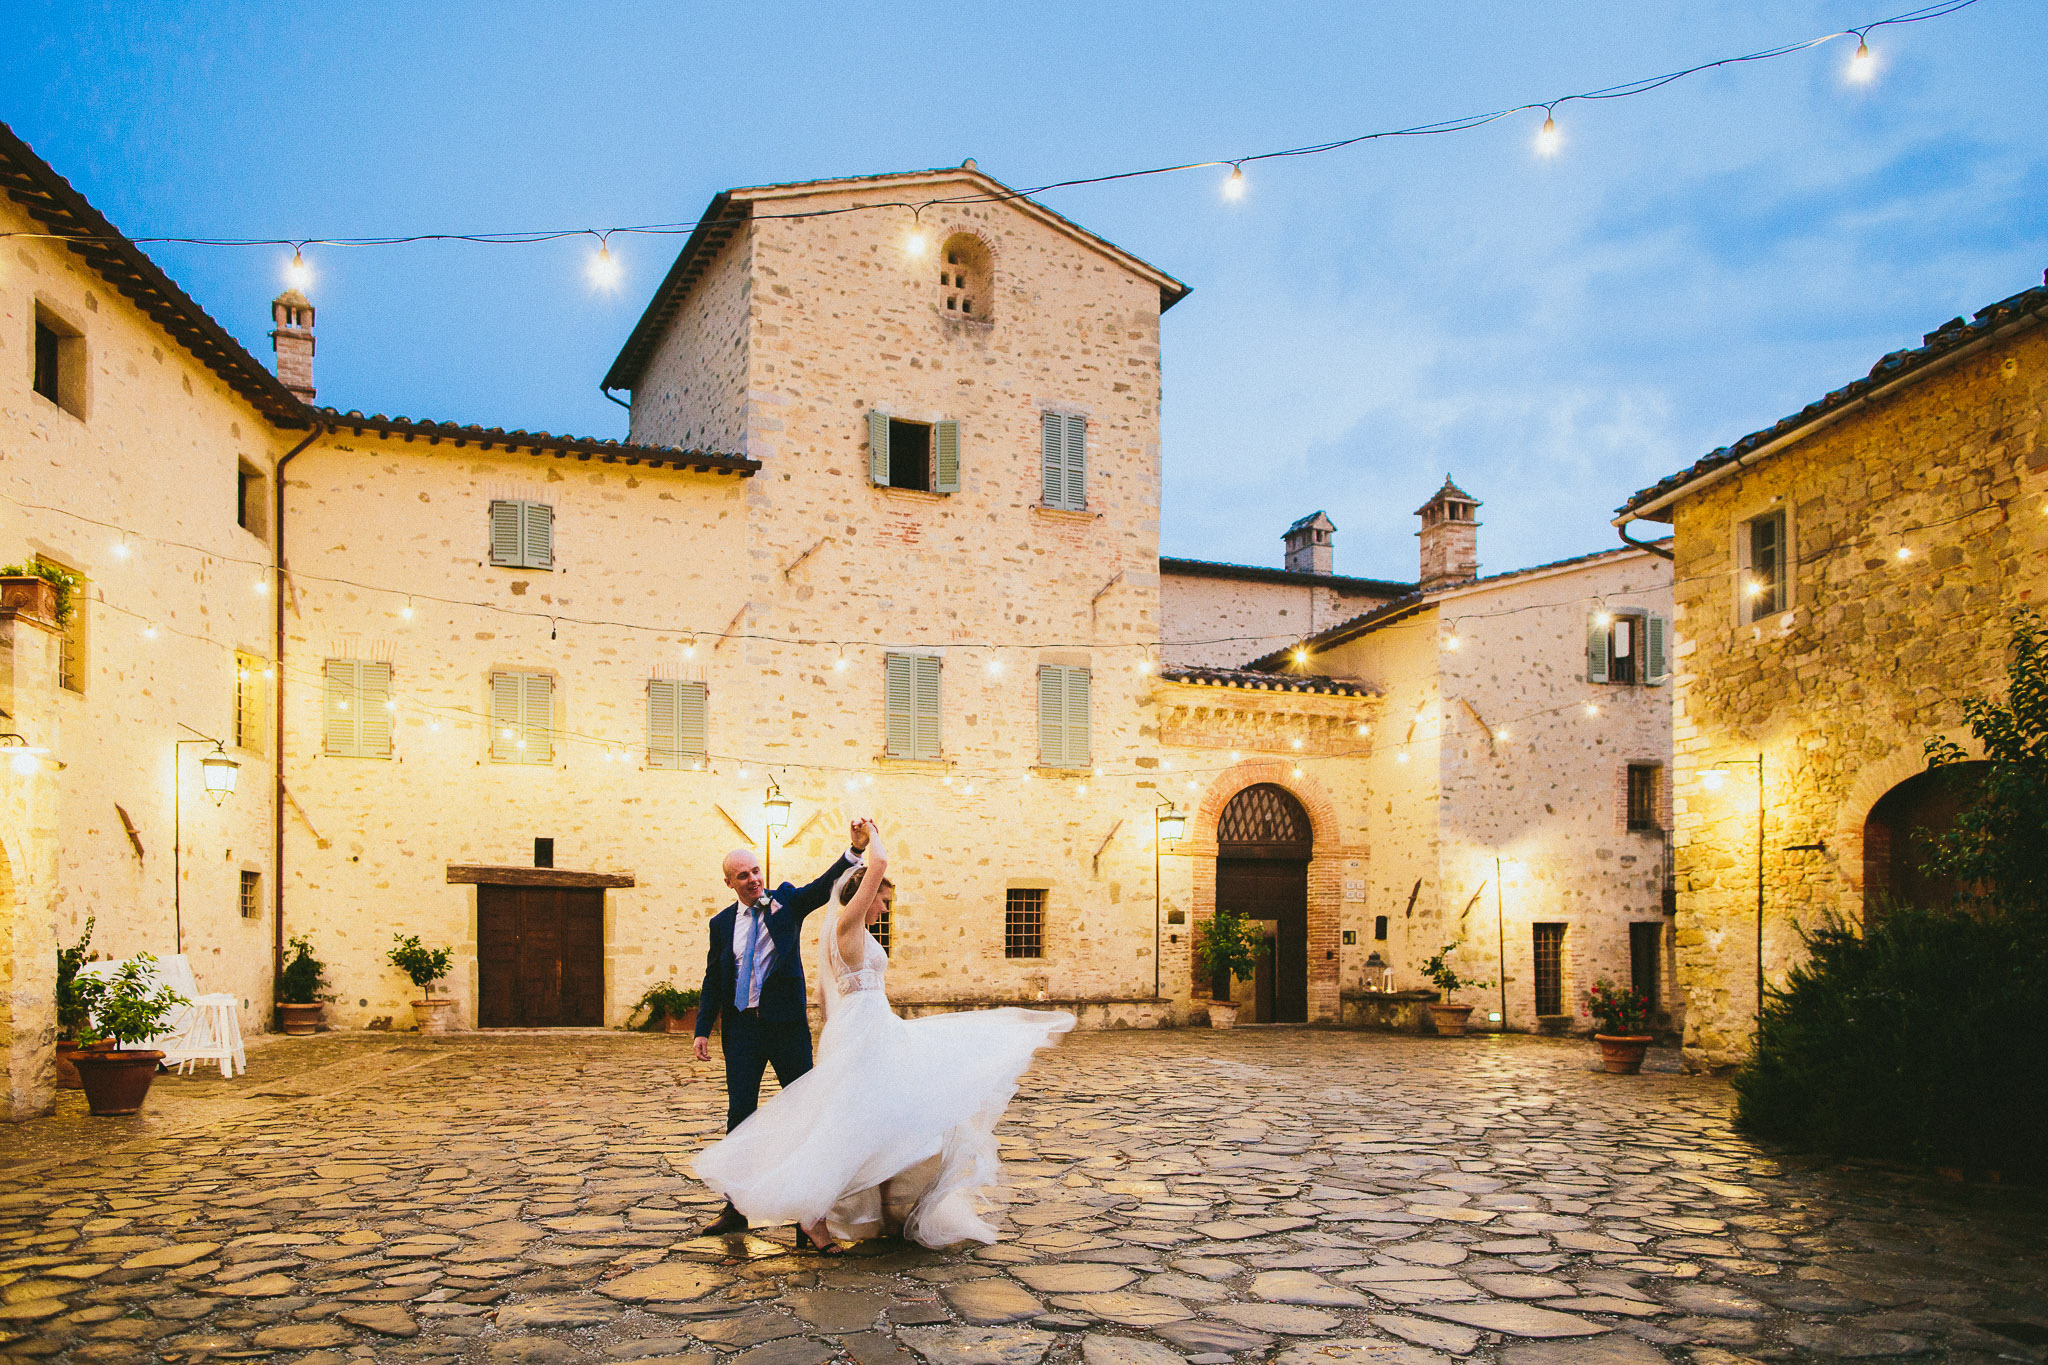 bride and groom dancing in a square in italy